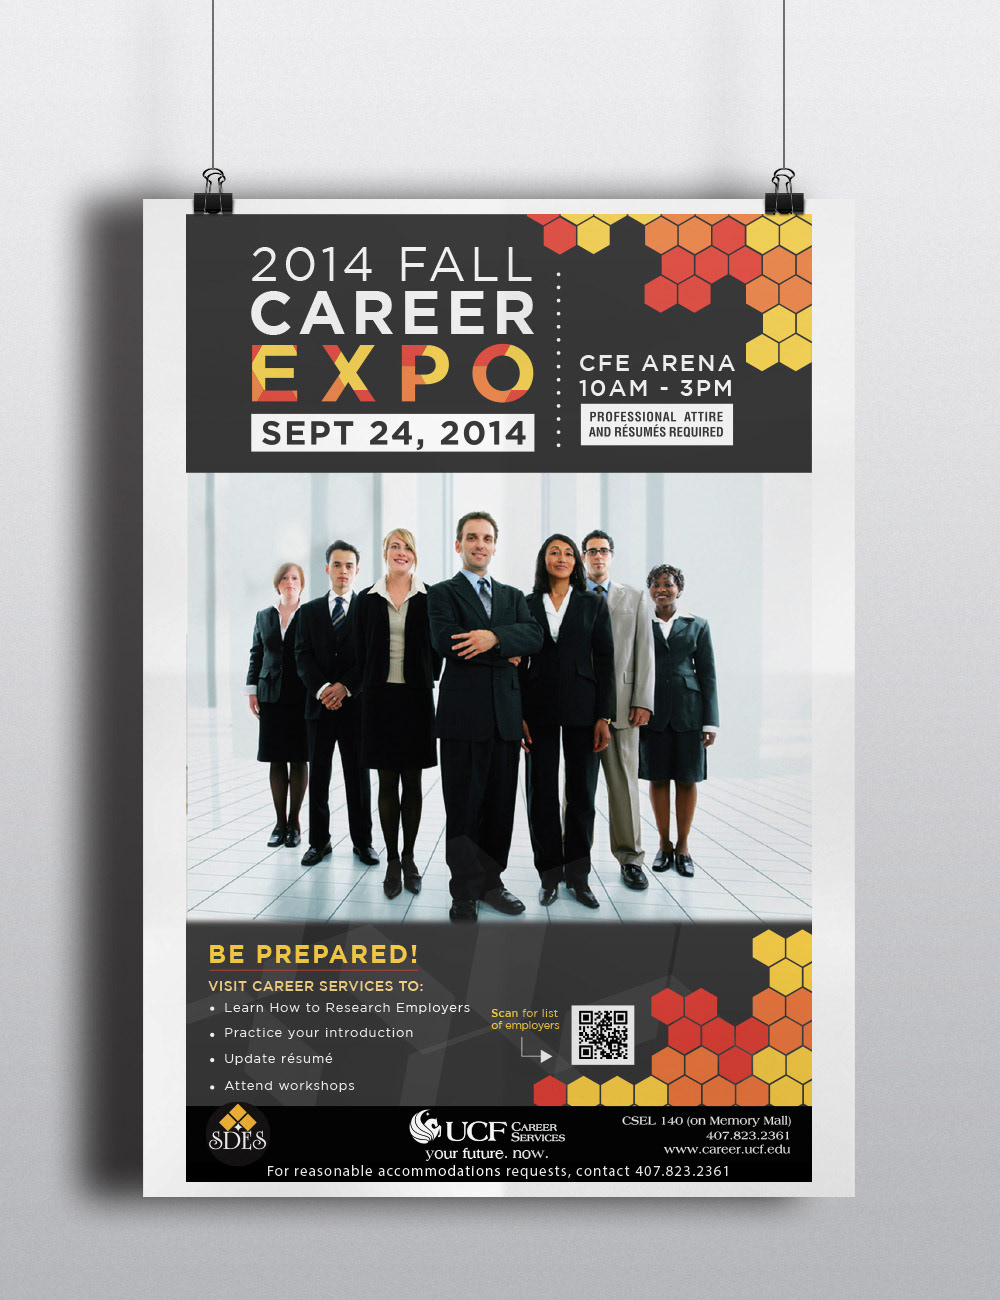 Fall career expo Fall Career Expo ucf University of Central florida poster design business professional